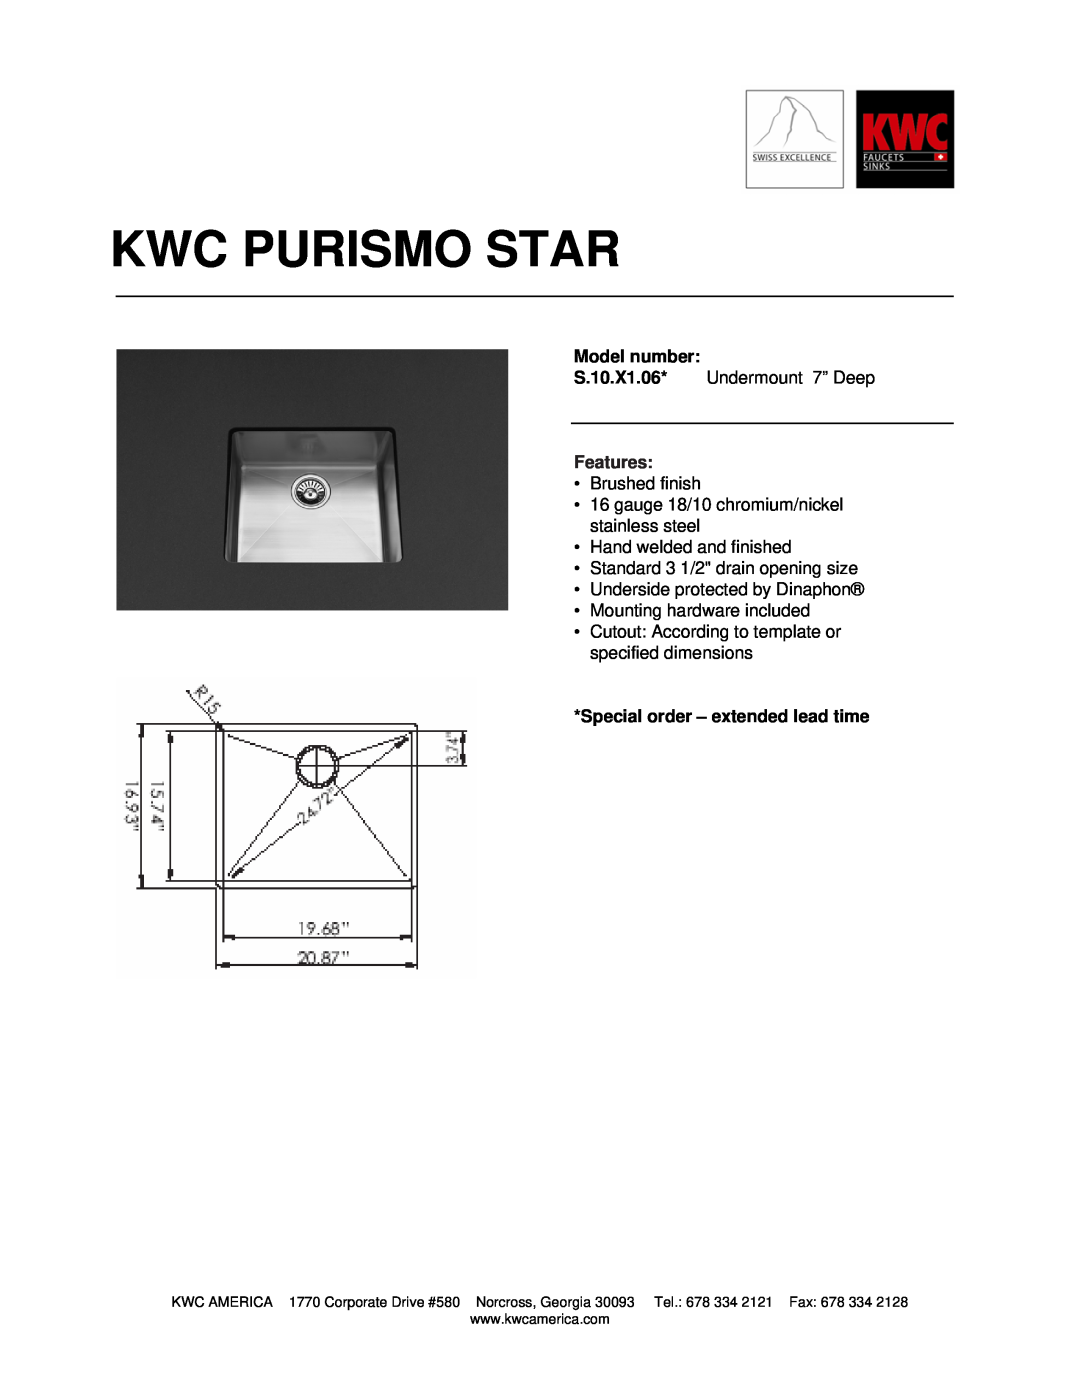 KWC S.10.X1.06 dimensions Kwc Purismo Star, Model number, Features, Special order - extended lead time 